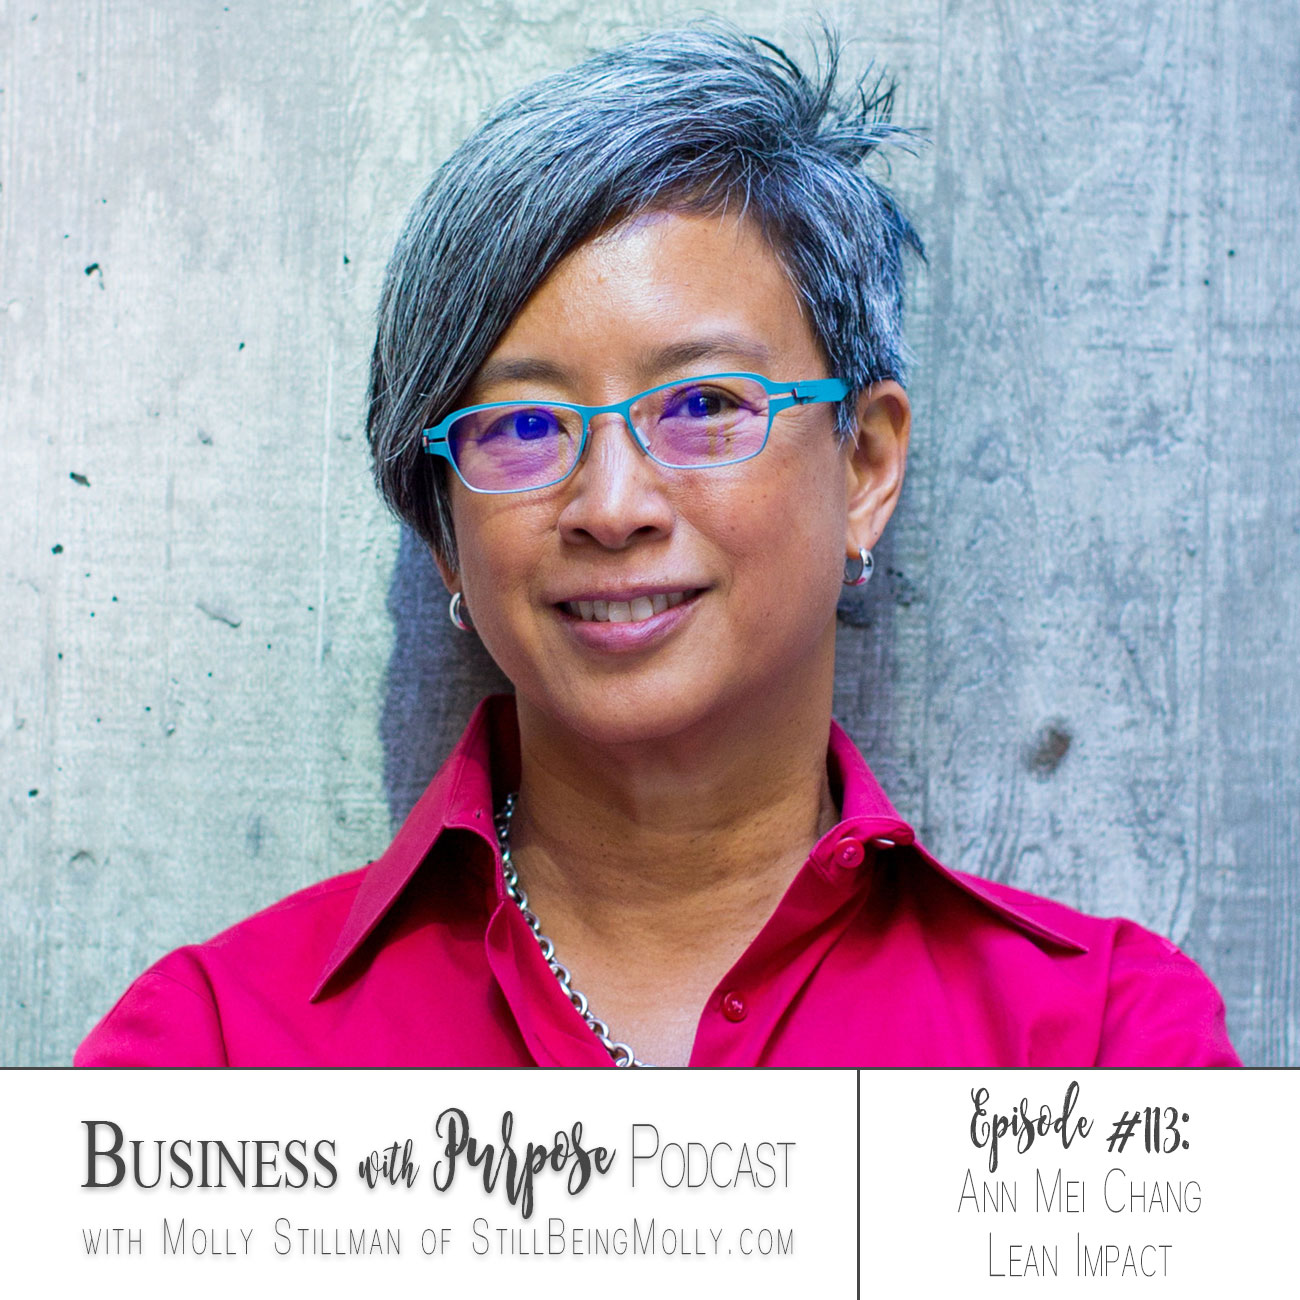 Business with Purpose Podcast EP 113: Ann Mei Chang, Lean Impact